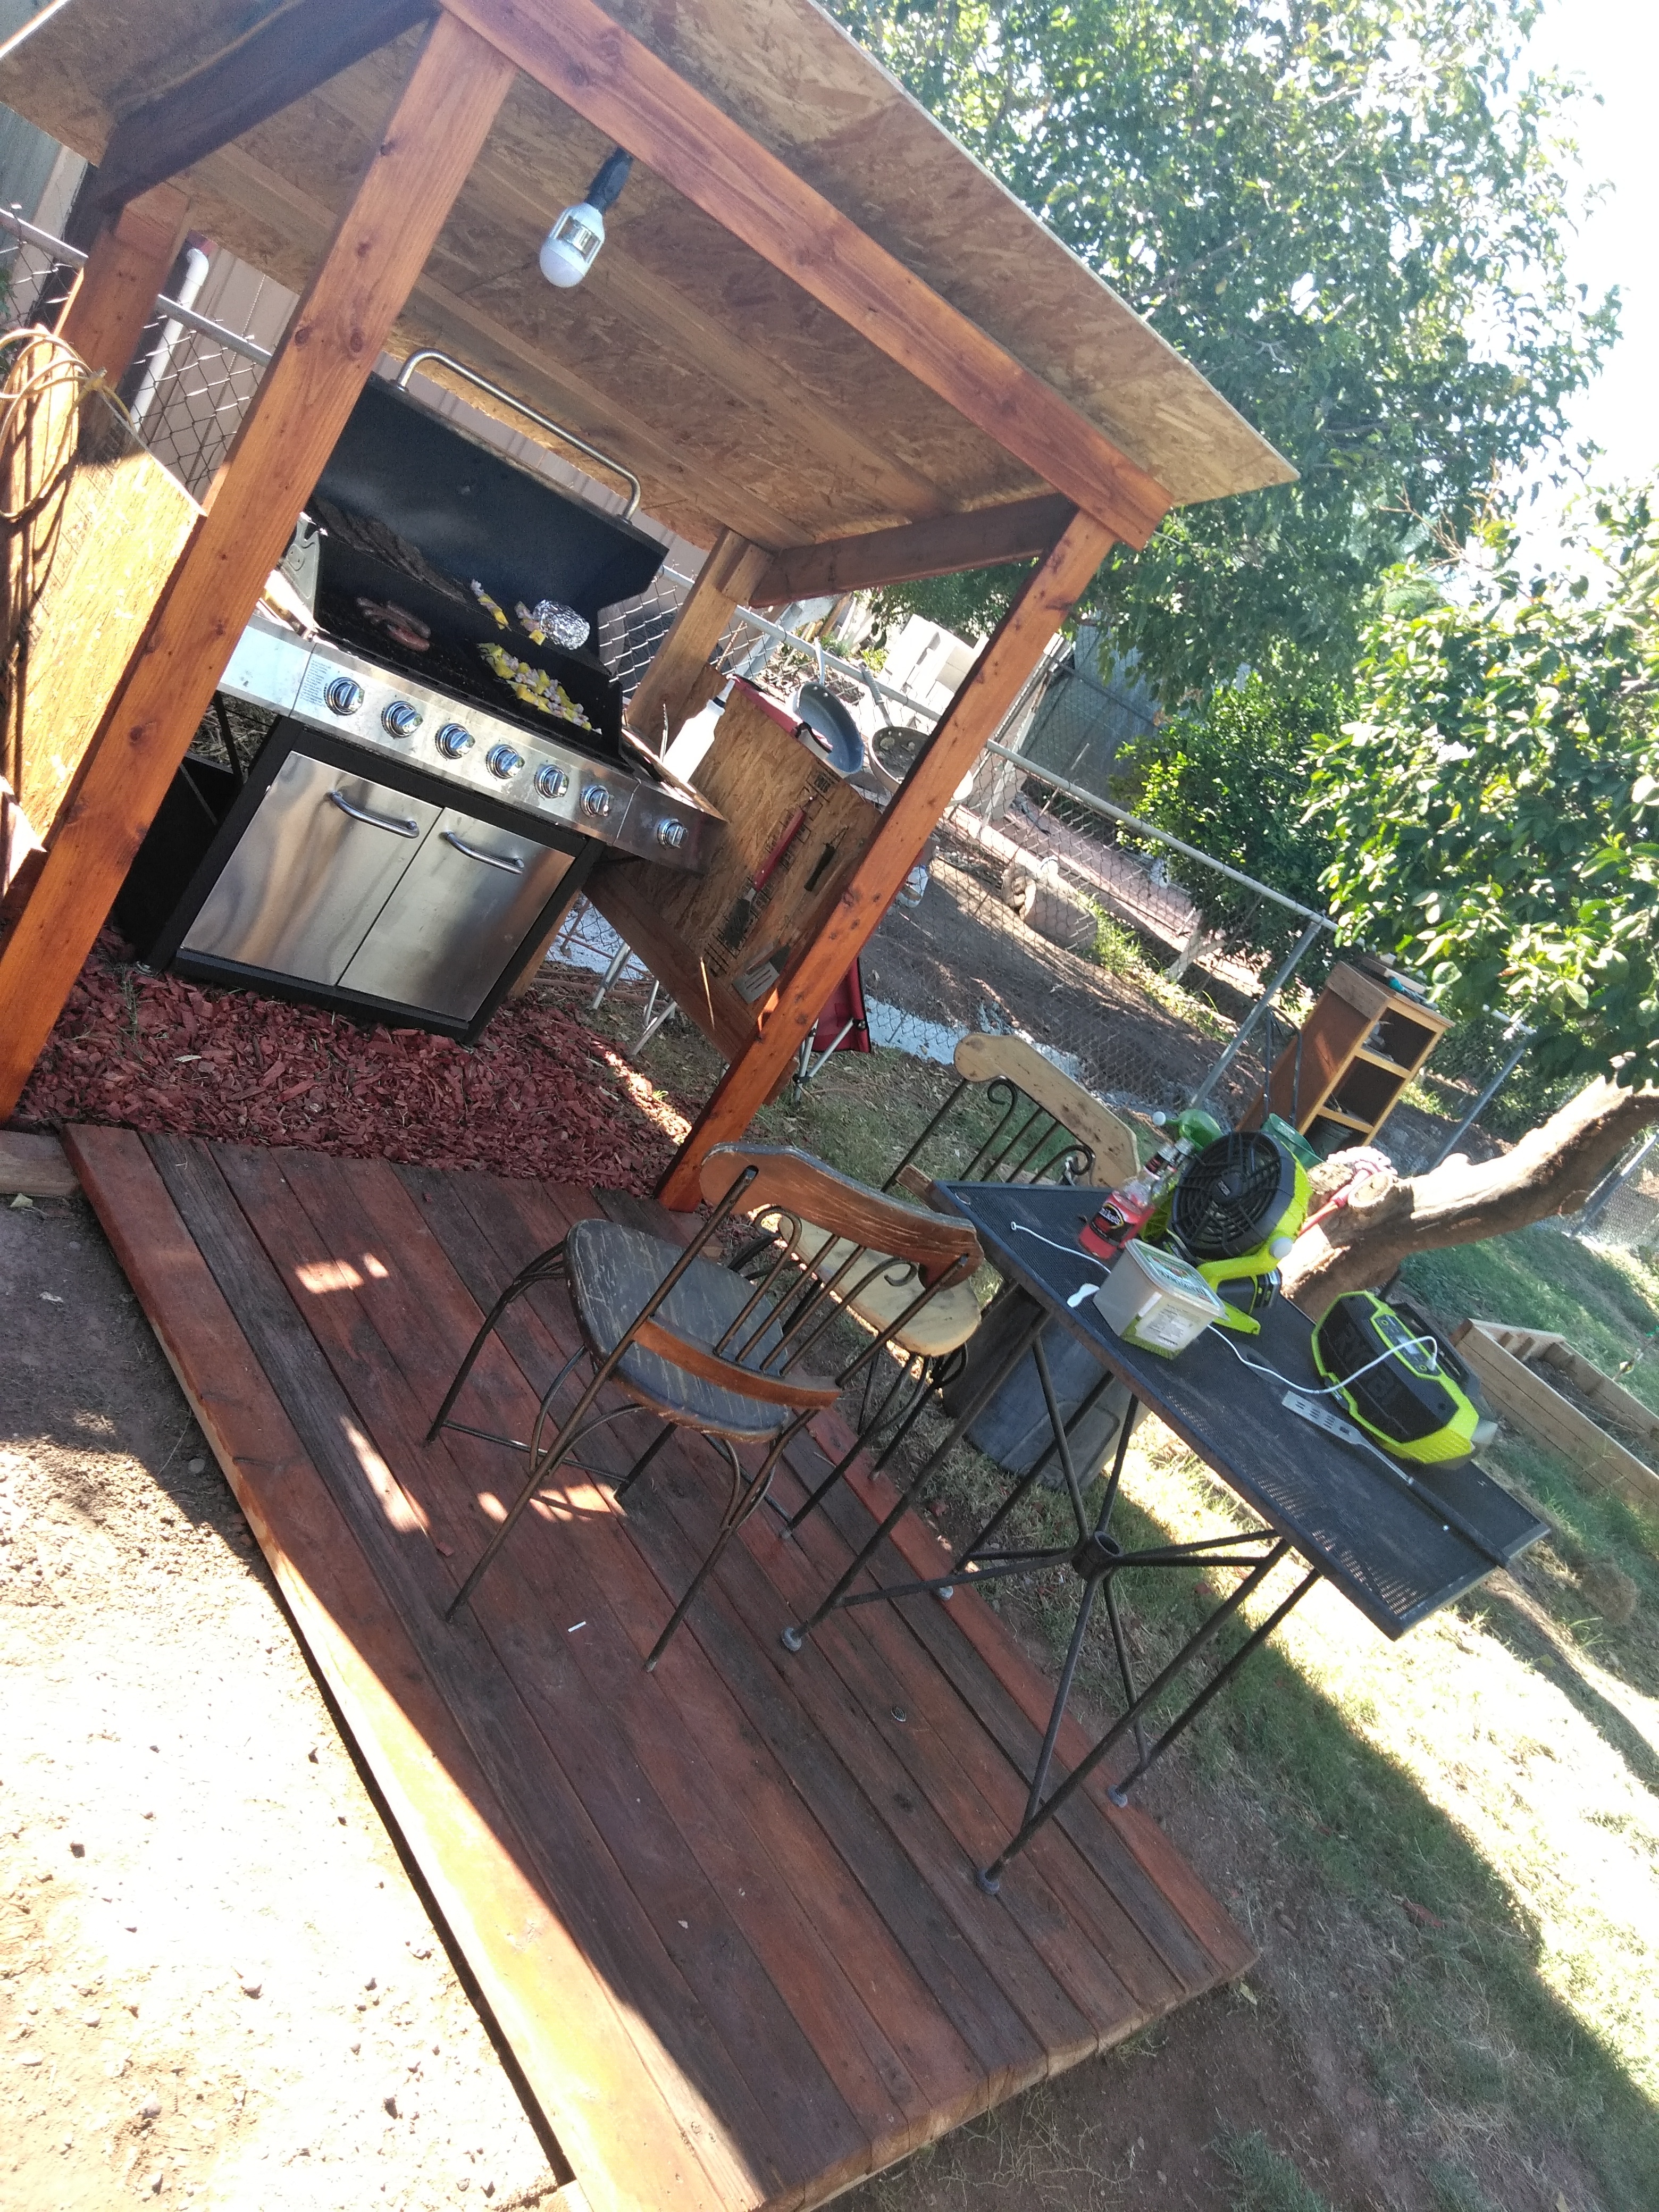 Grill gazebo and small deck - RYOBI Nation Projects